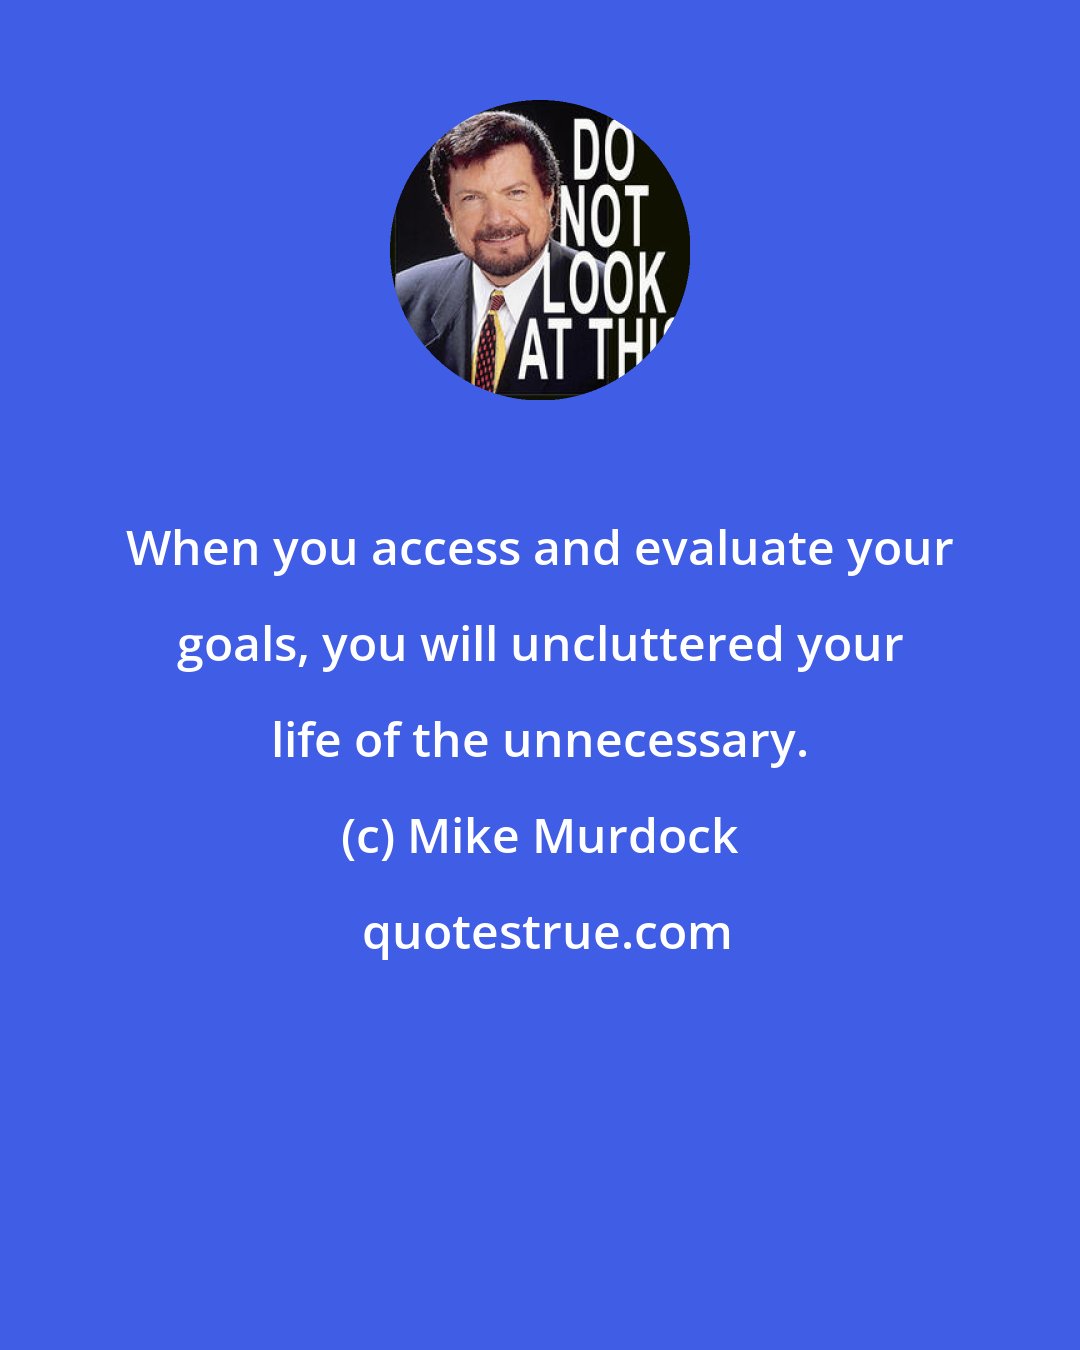 Mike Murdock: When you access and evaluate your goals, you will uncluttered your life of the unnecessary.